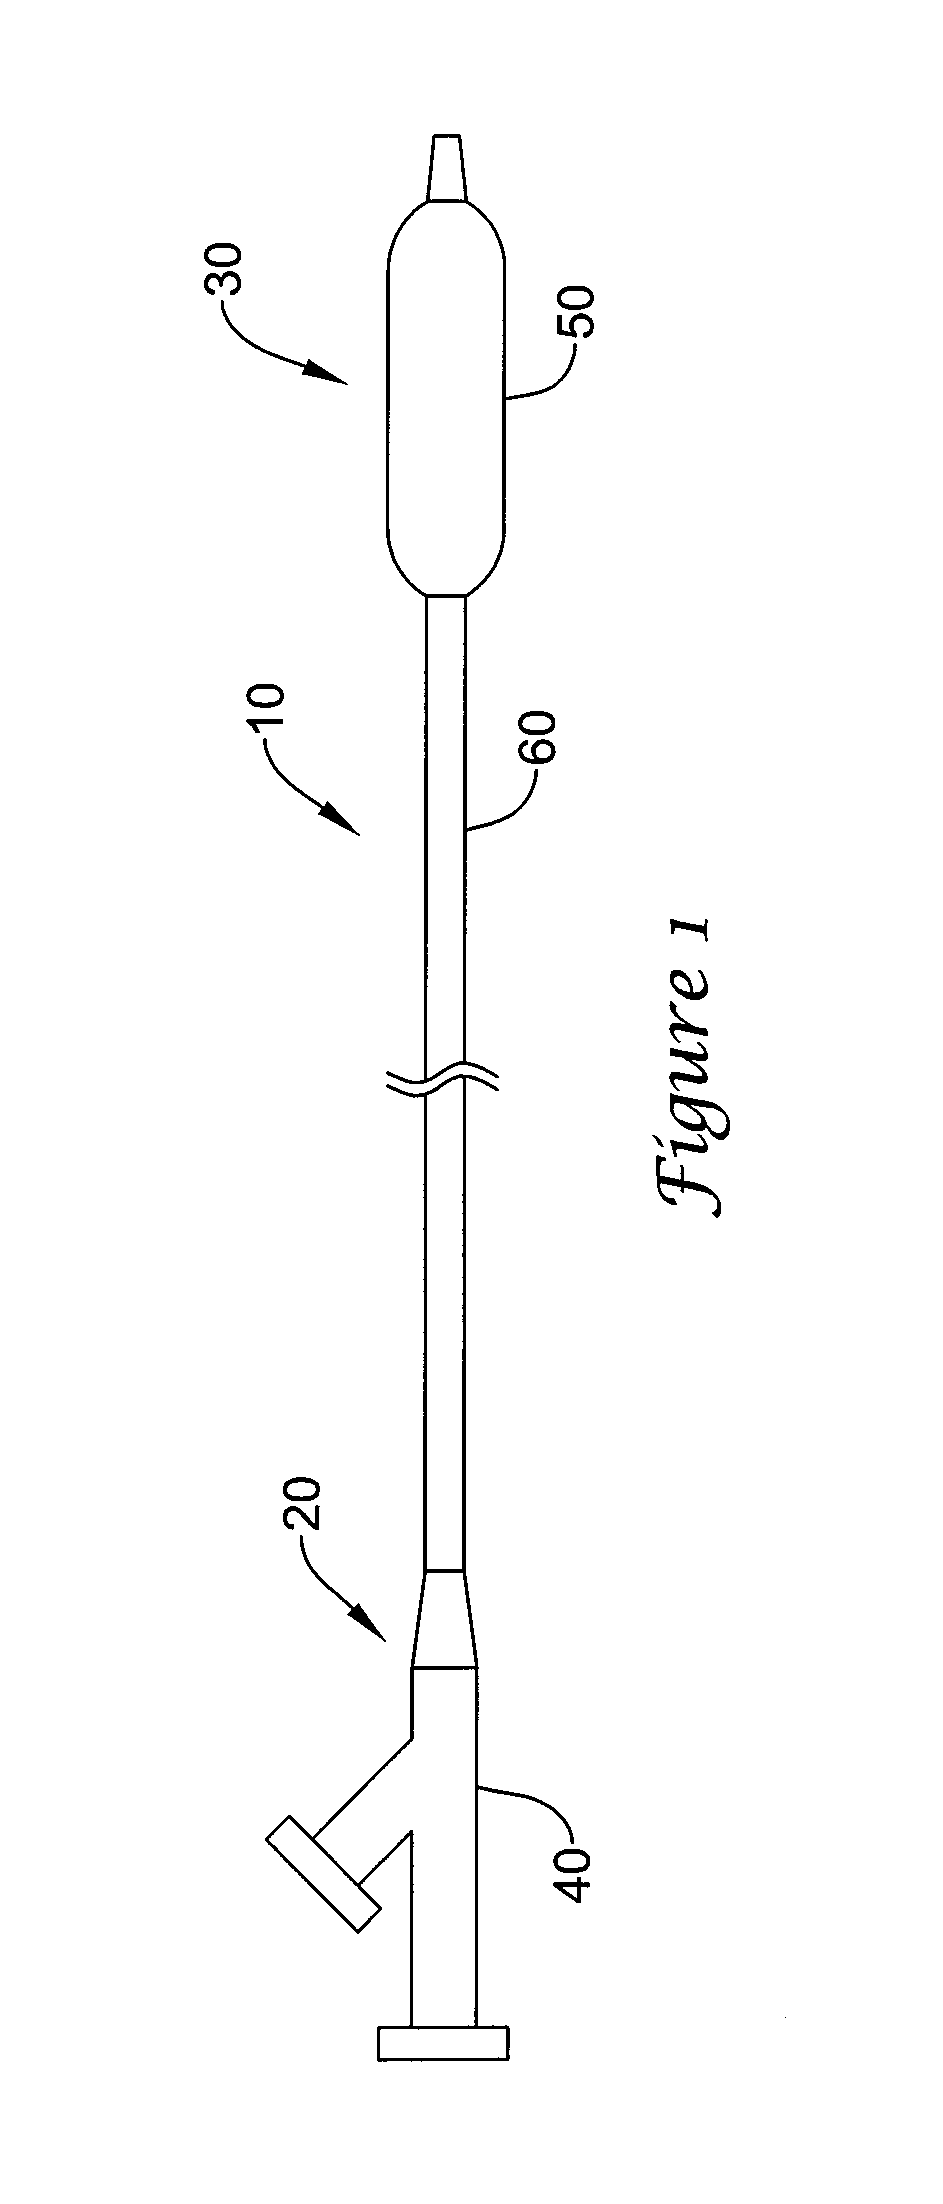 Catheter Having an Ultra Soft Tip and Methods for Making the Same